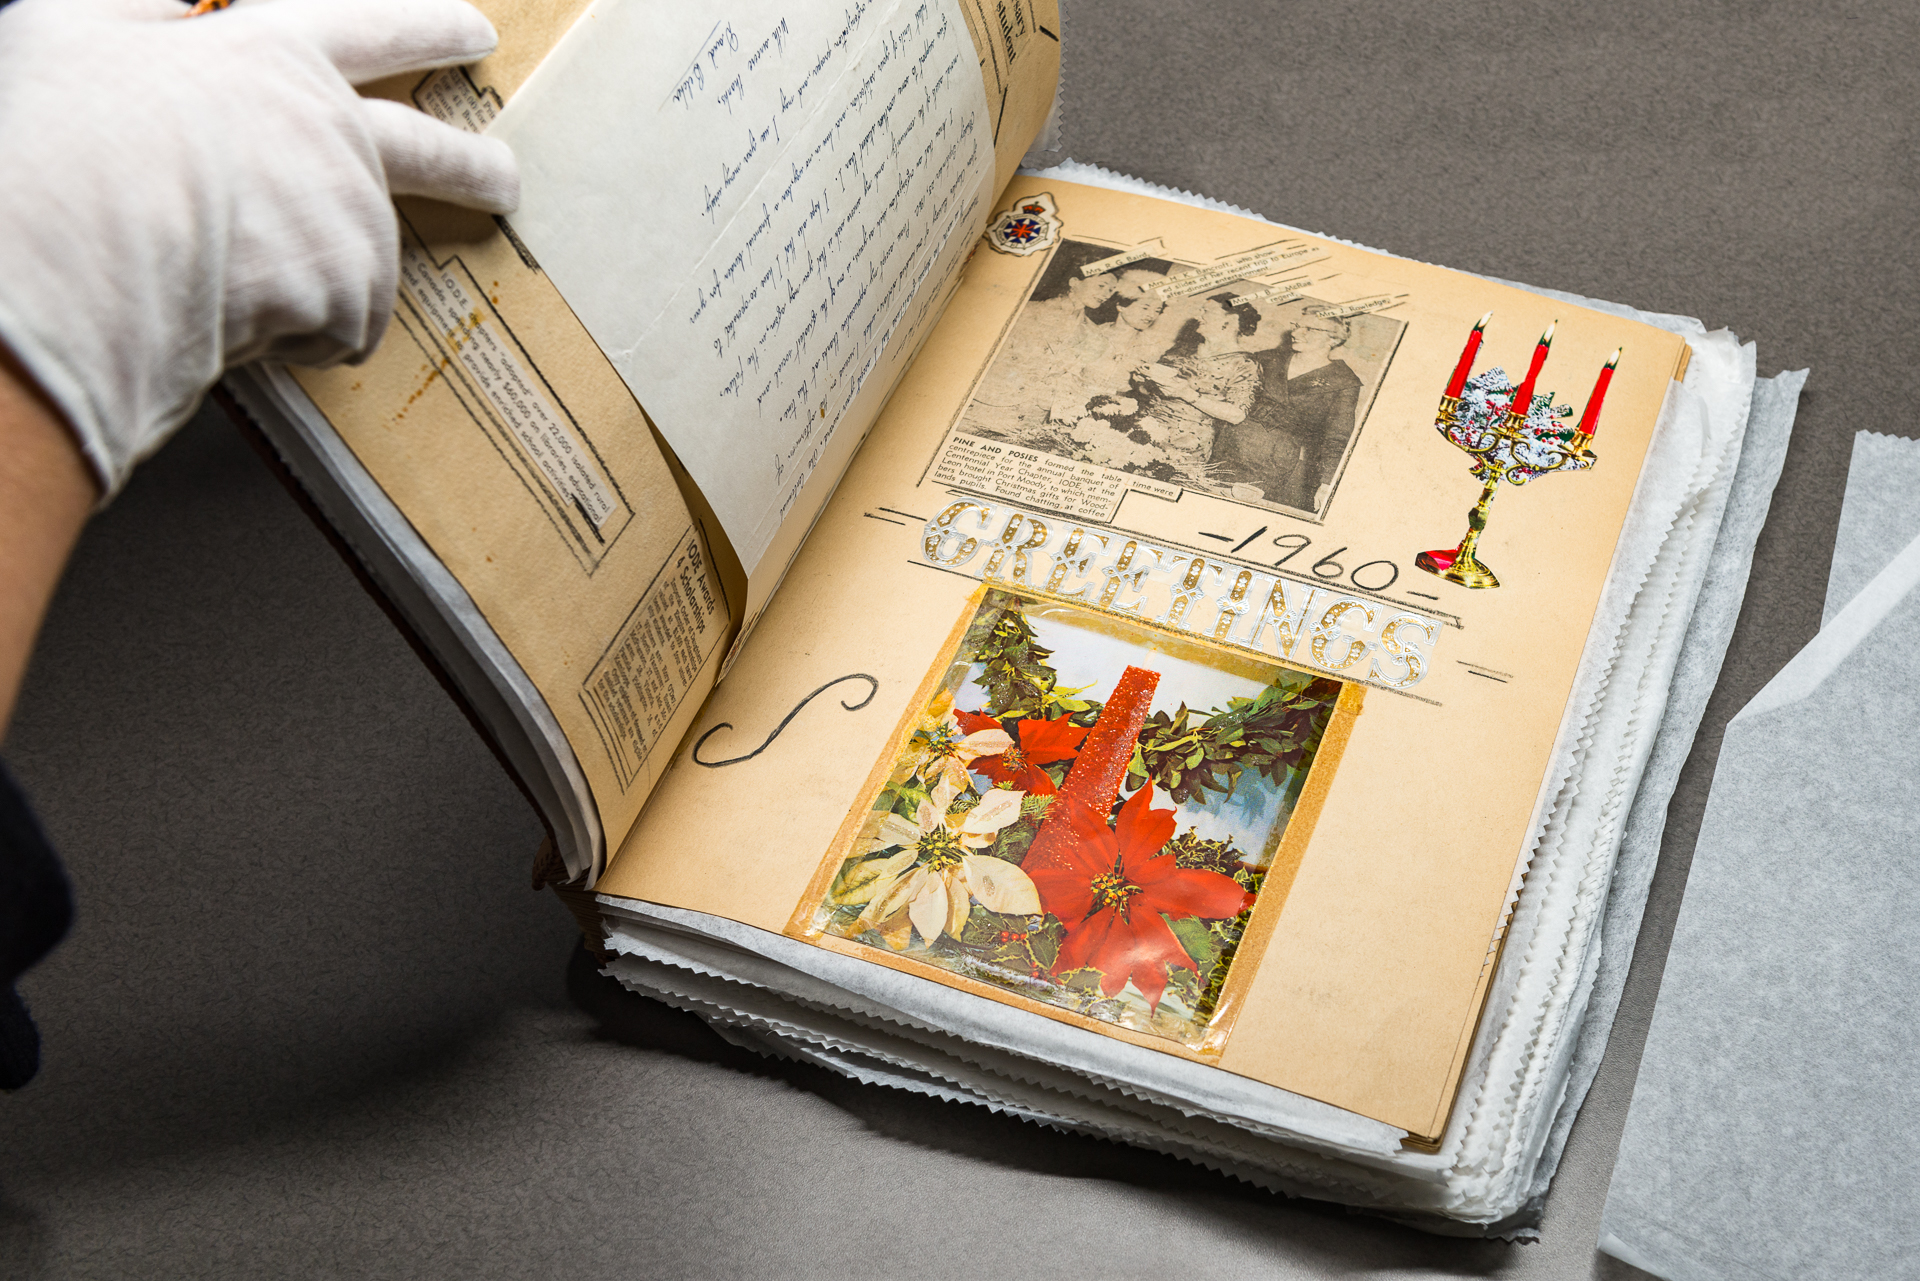 Imperial Order of the Daughters of the Empire Centennial Scrapbook, Circa 1971 (JPG) Opens in new window